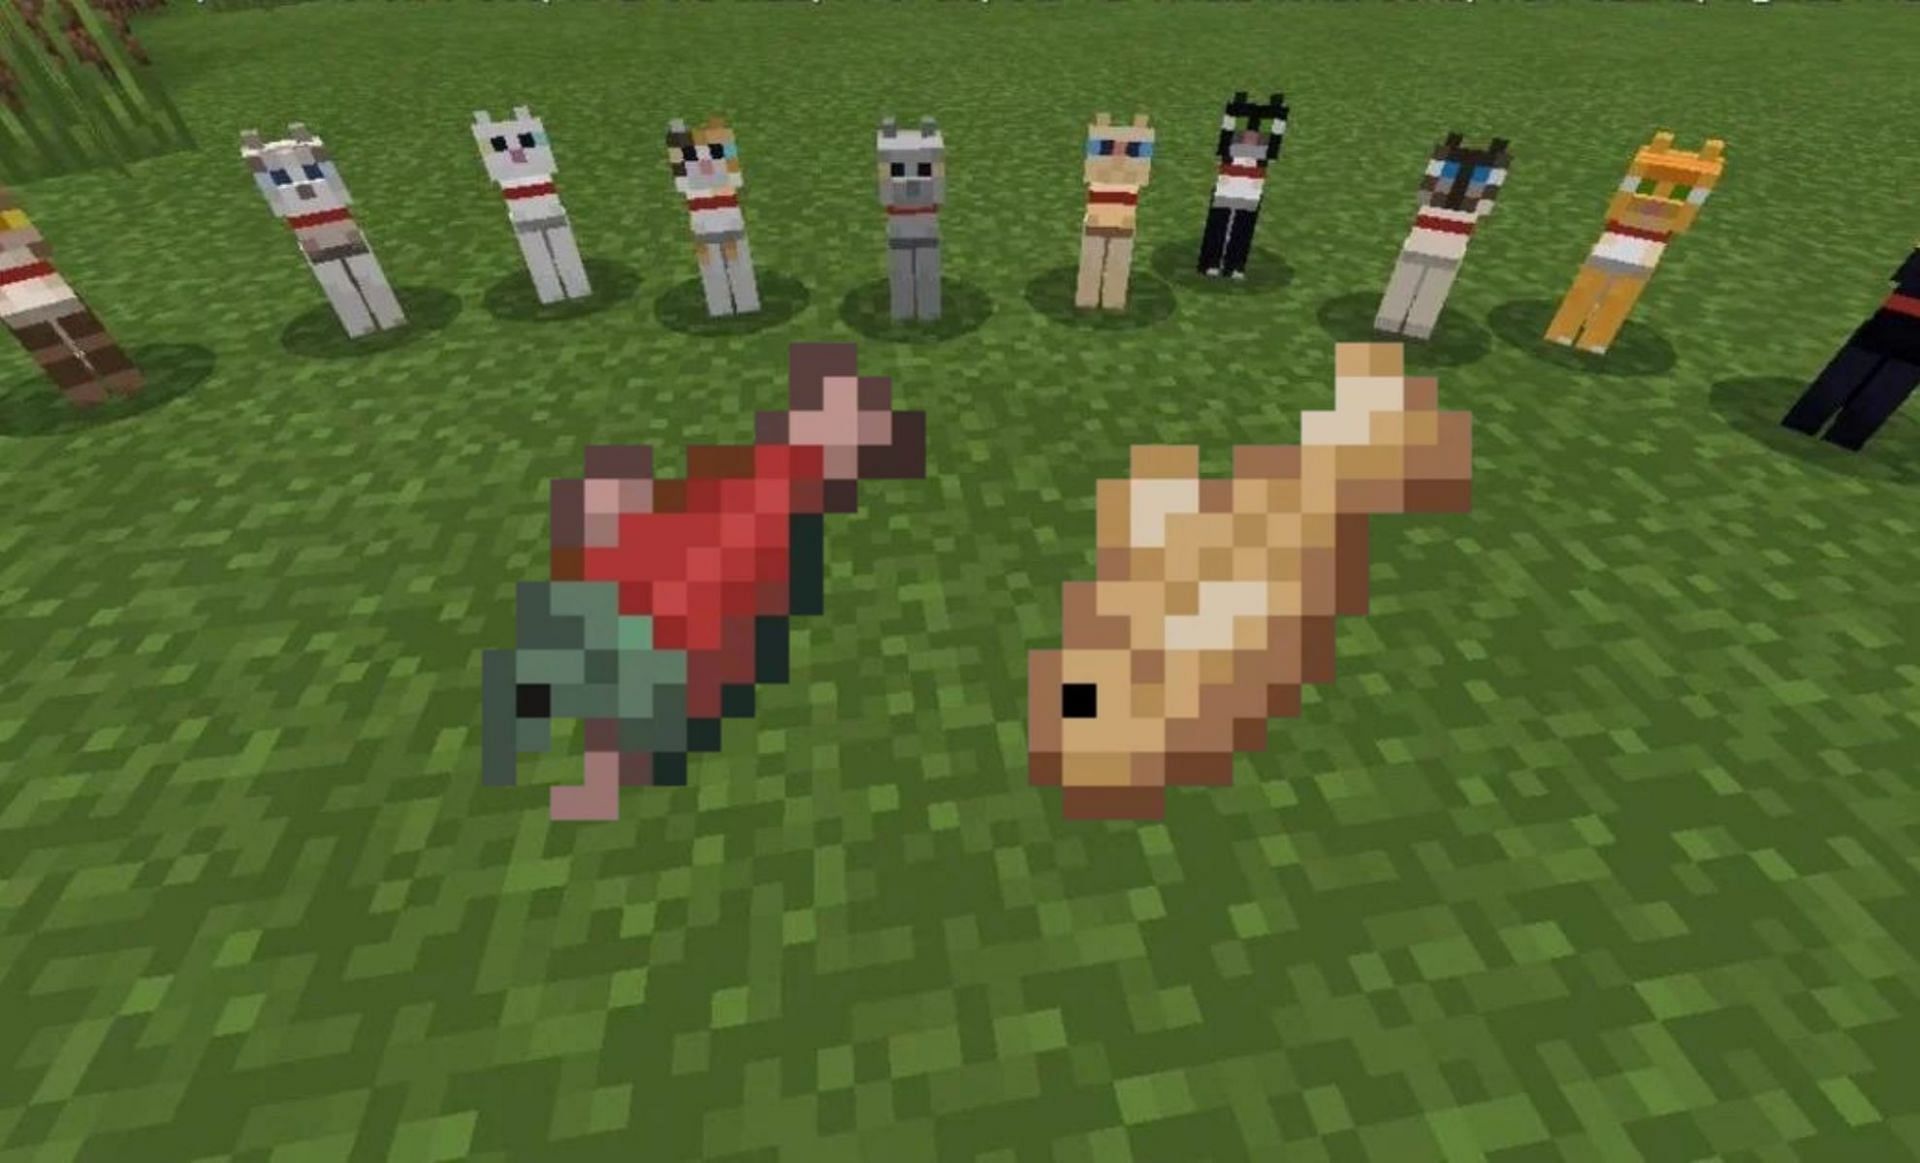 Tamed cats (Images via Minecraft Wiki)